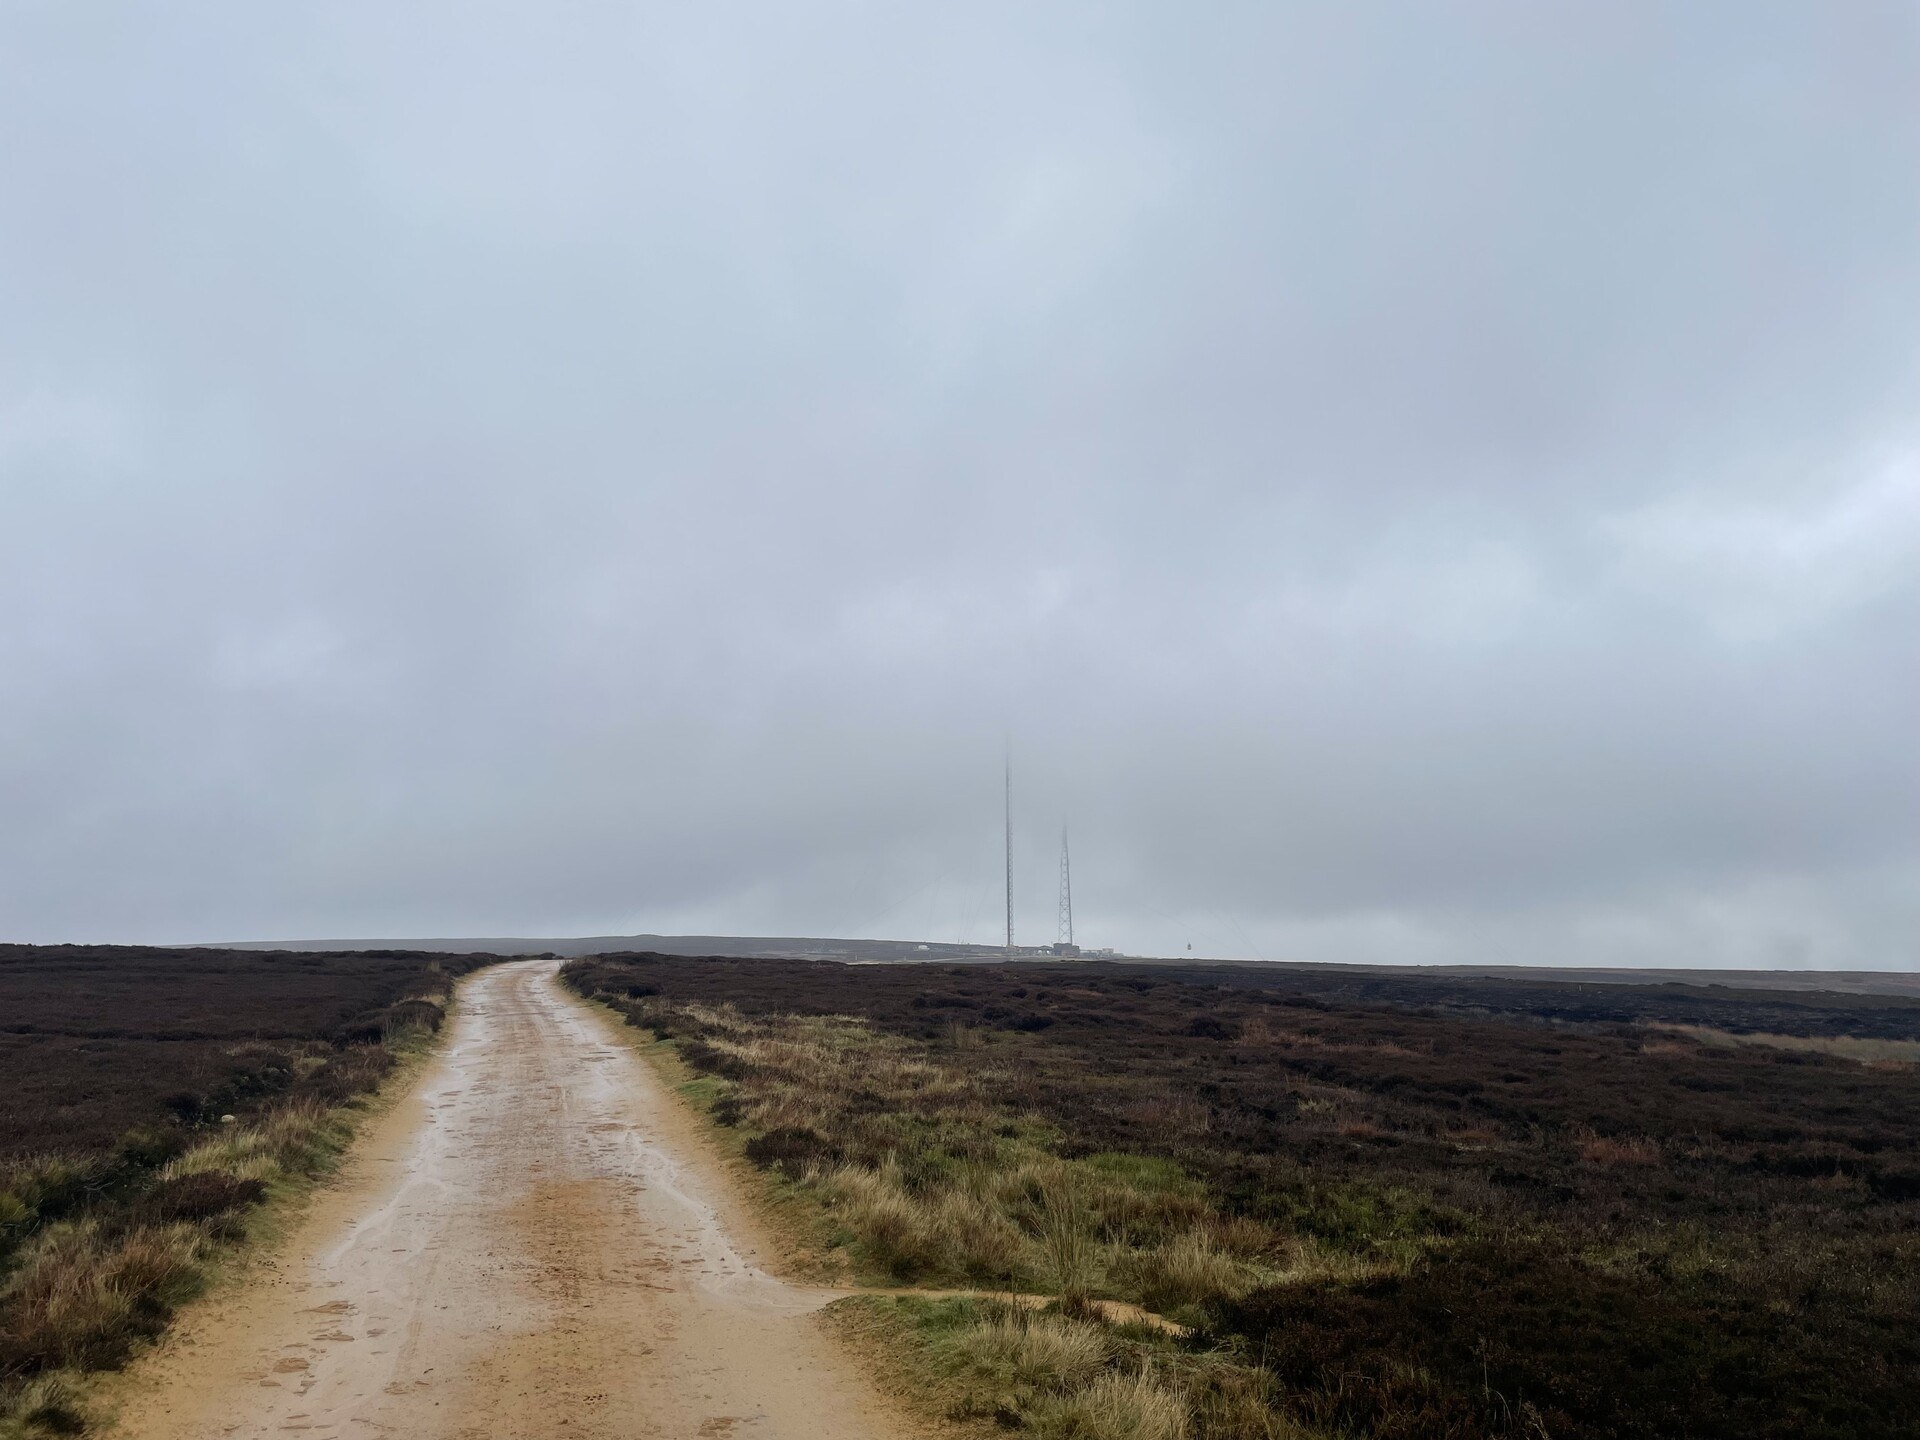 A dirt track stretching off across Bilsdale West moor, with the transmitting tower in the clouds in the distance